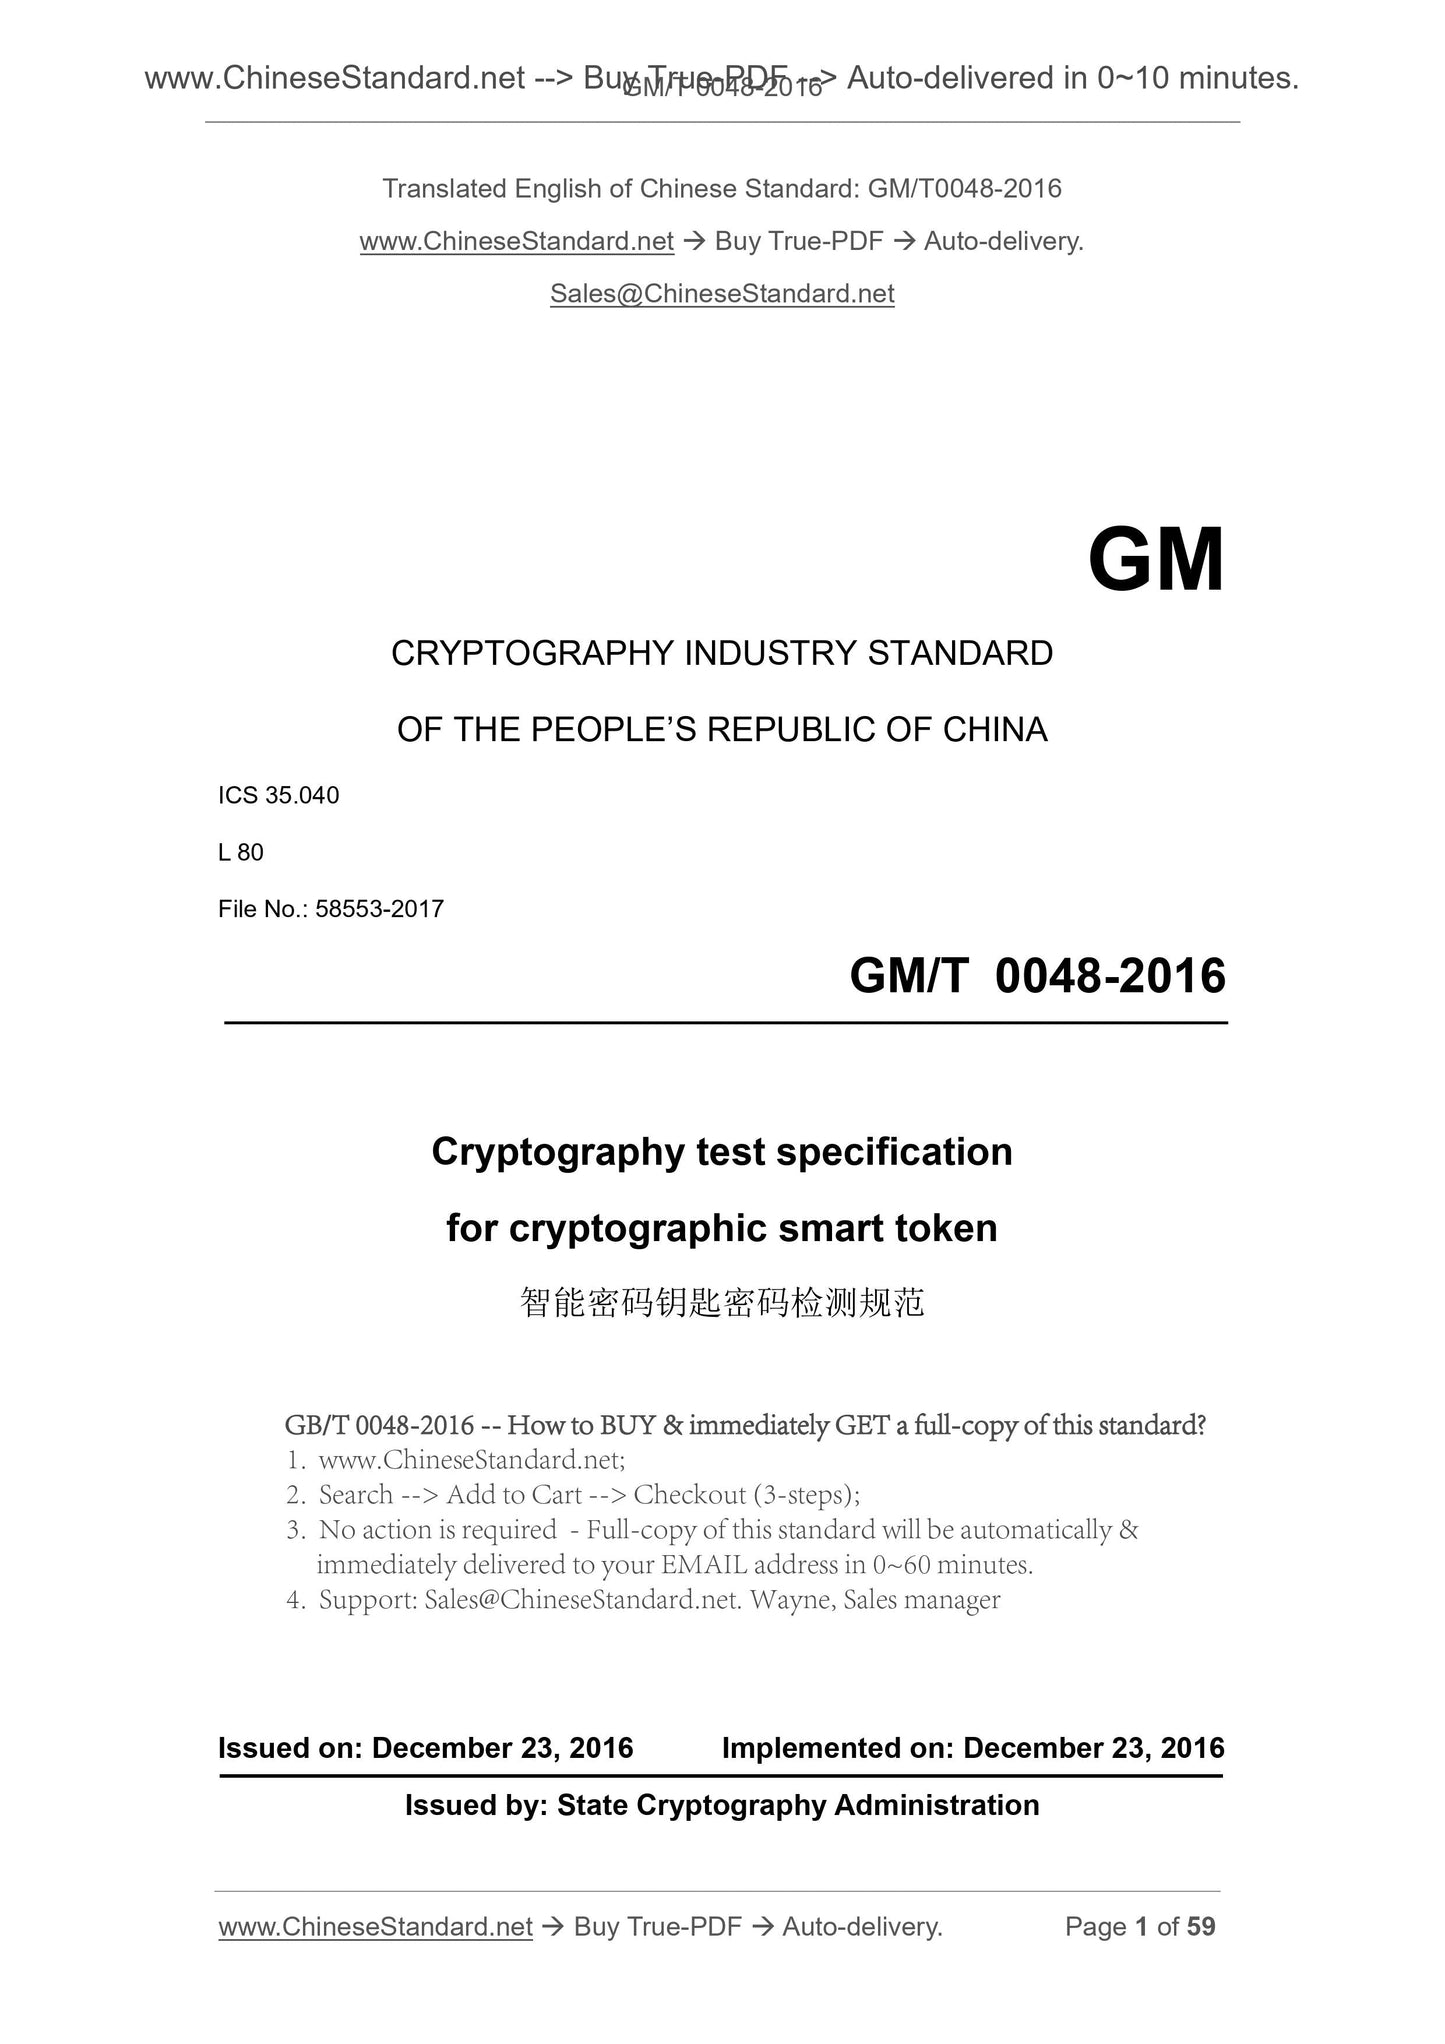 GM/T 0048-2016 Page 1